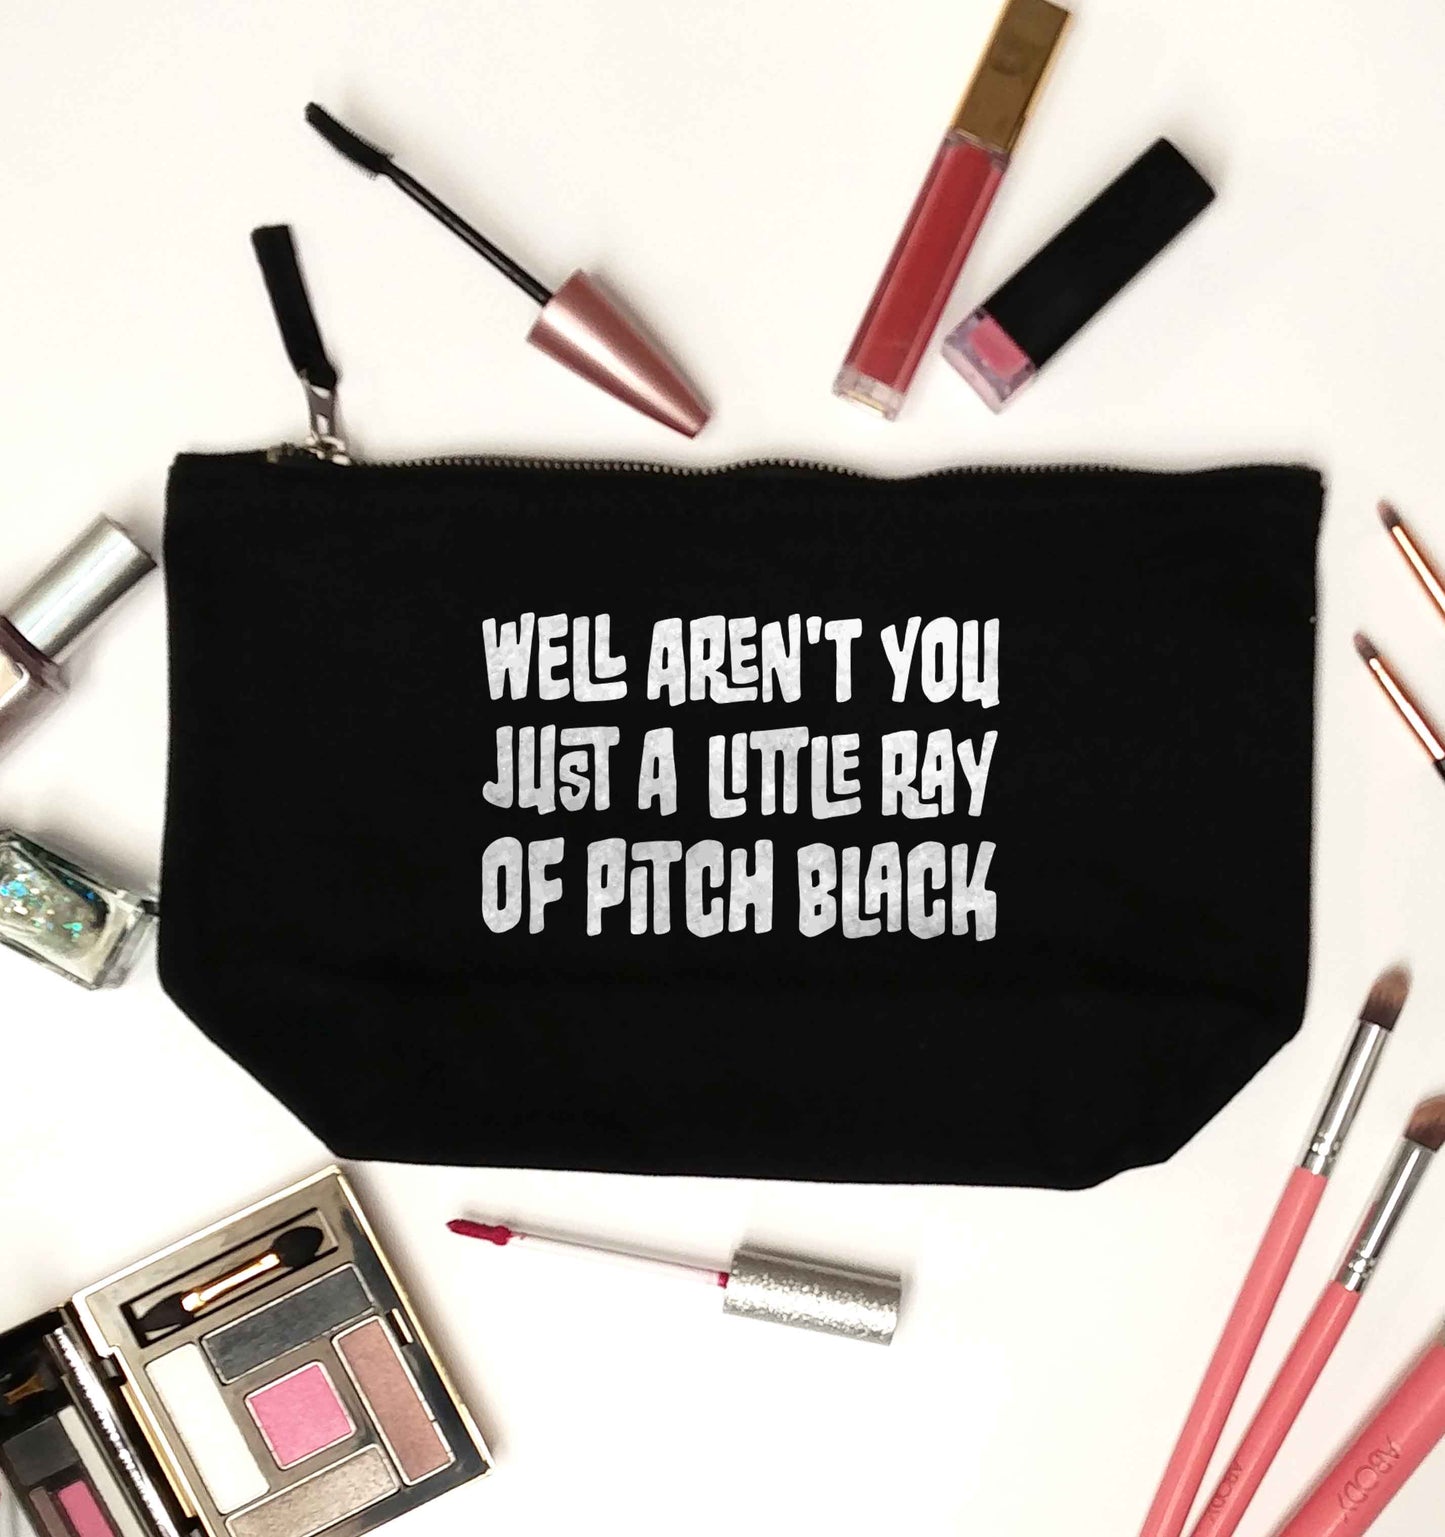 Well aren't you just a little ray of pitch black Kit black makeup bag